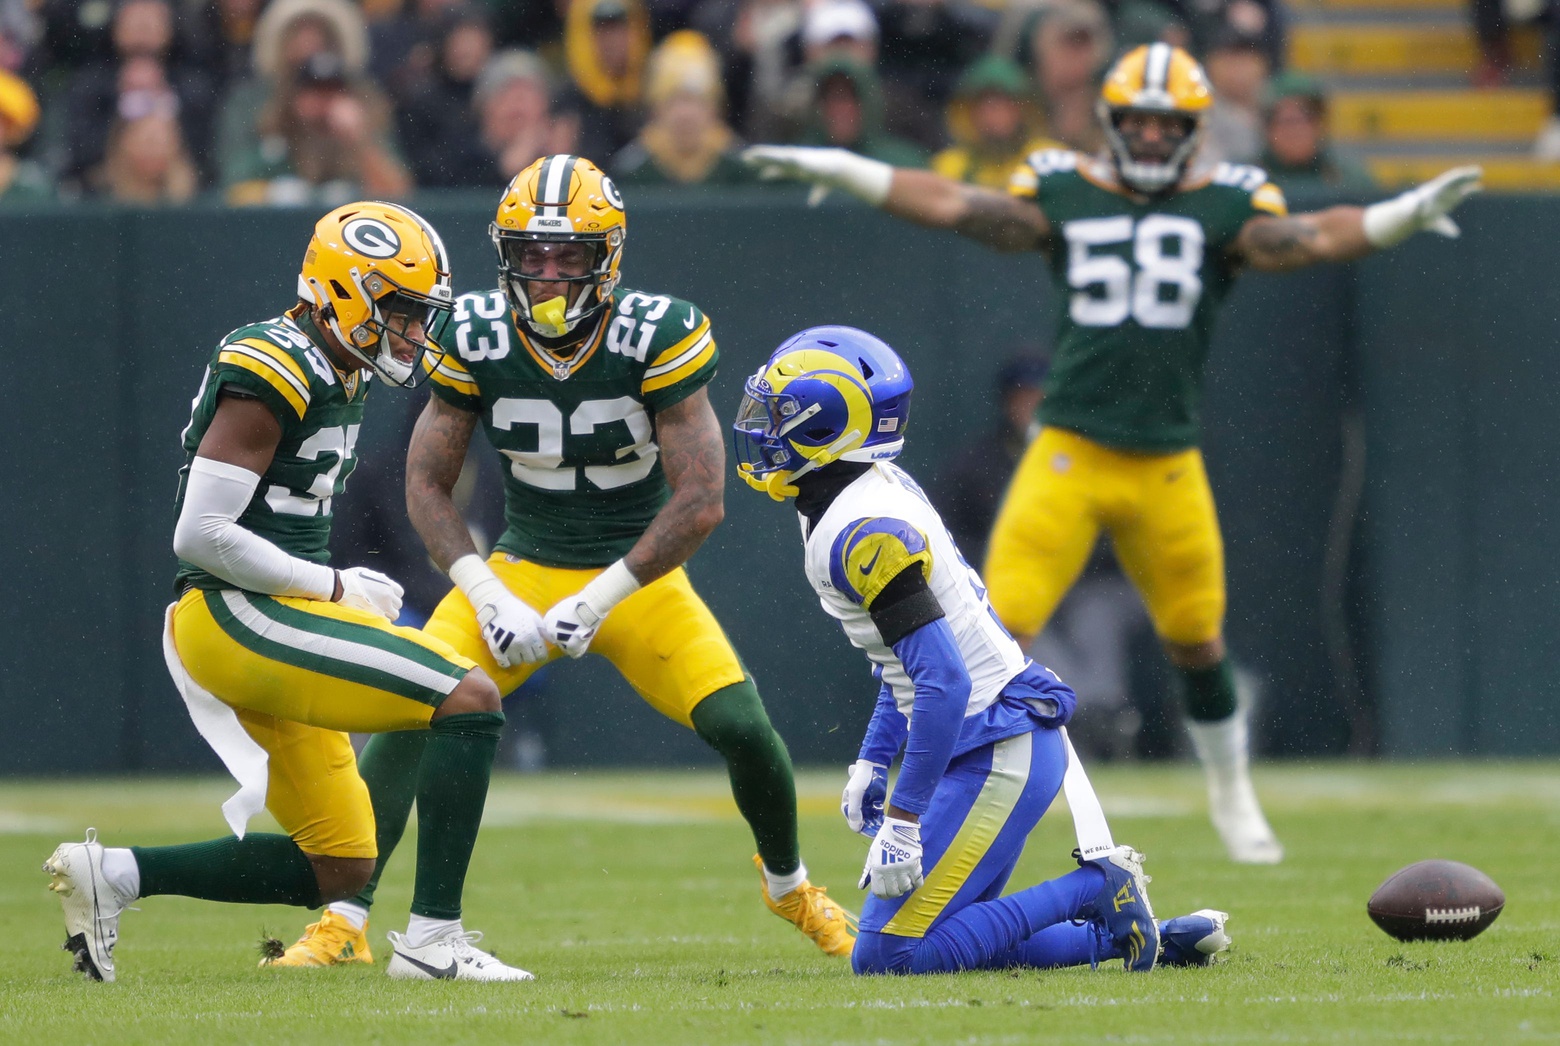 Dope Sheet: Packers travel East to take on the Steelers